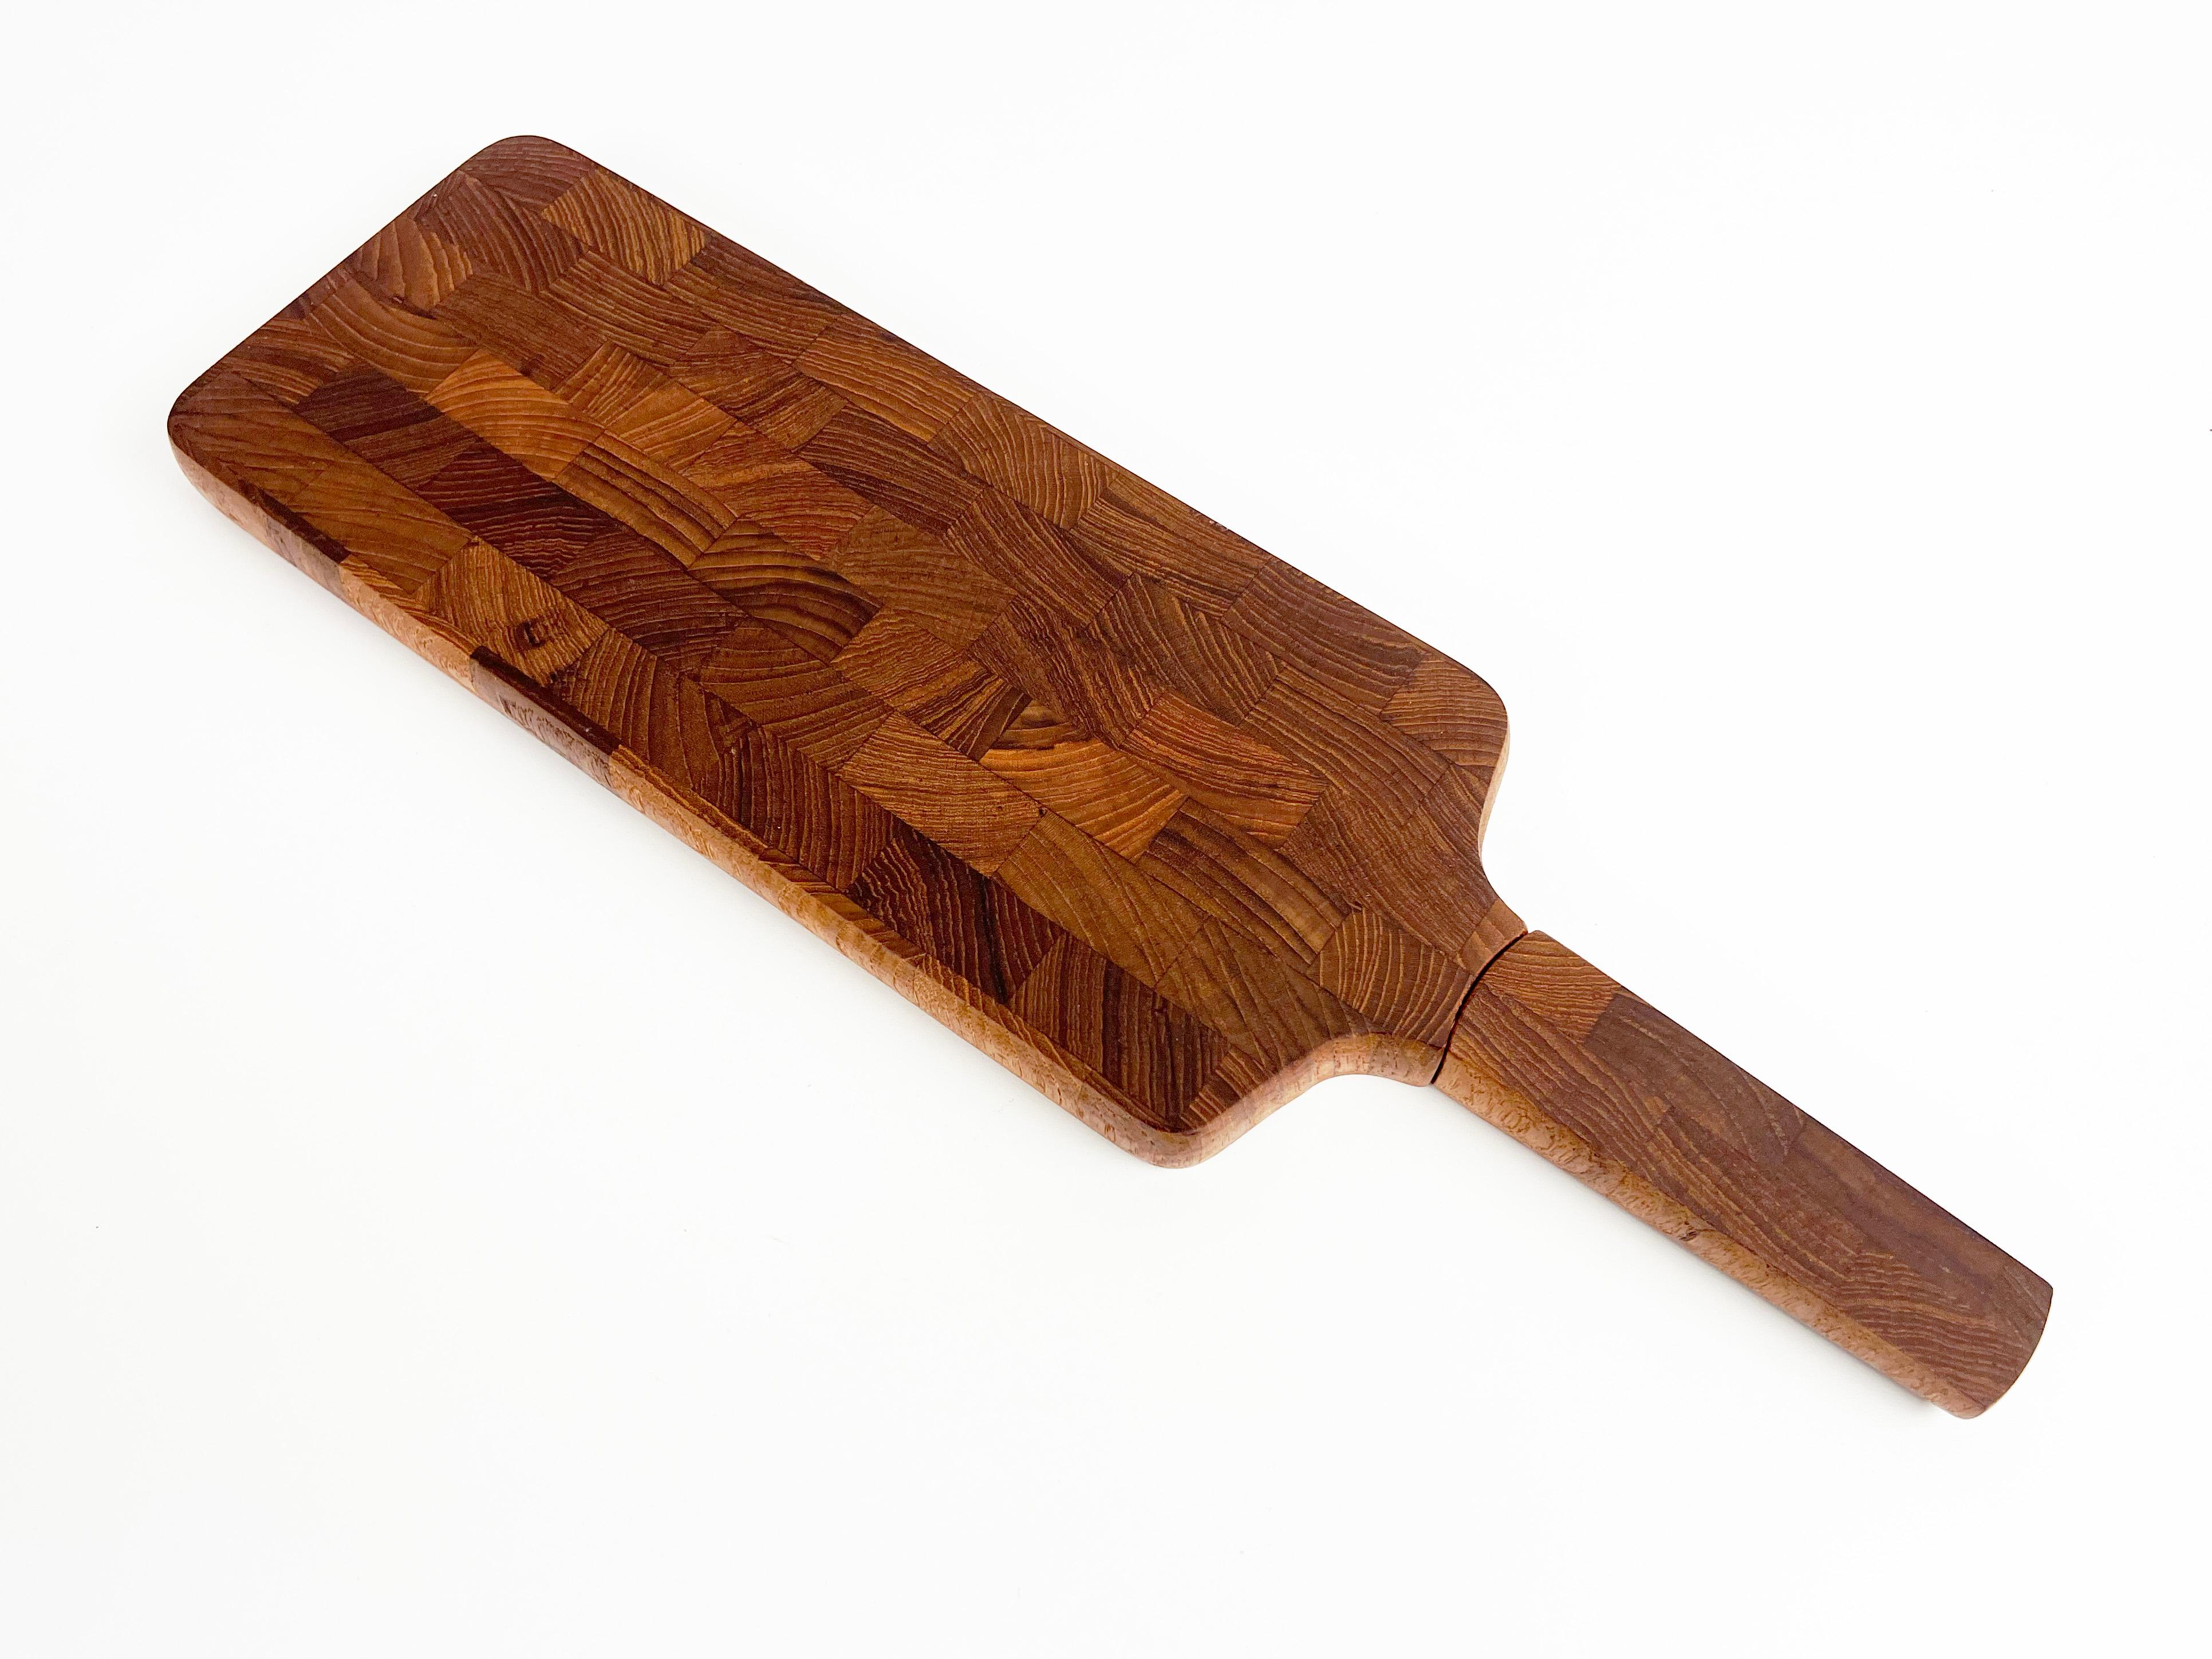 Stainless Steel Dansk End Grain Teak Paddle Shaped Serving Board with Built in Knife For Sale